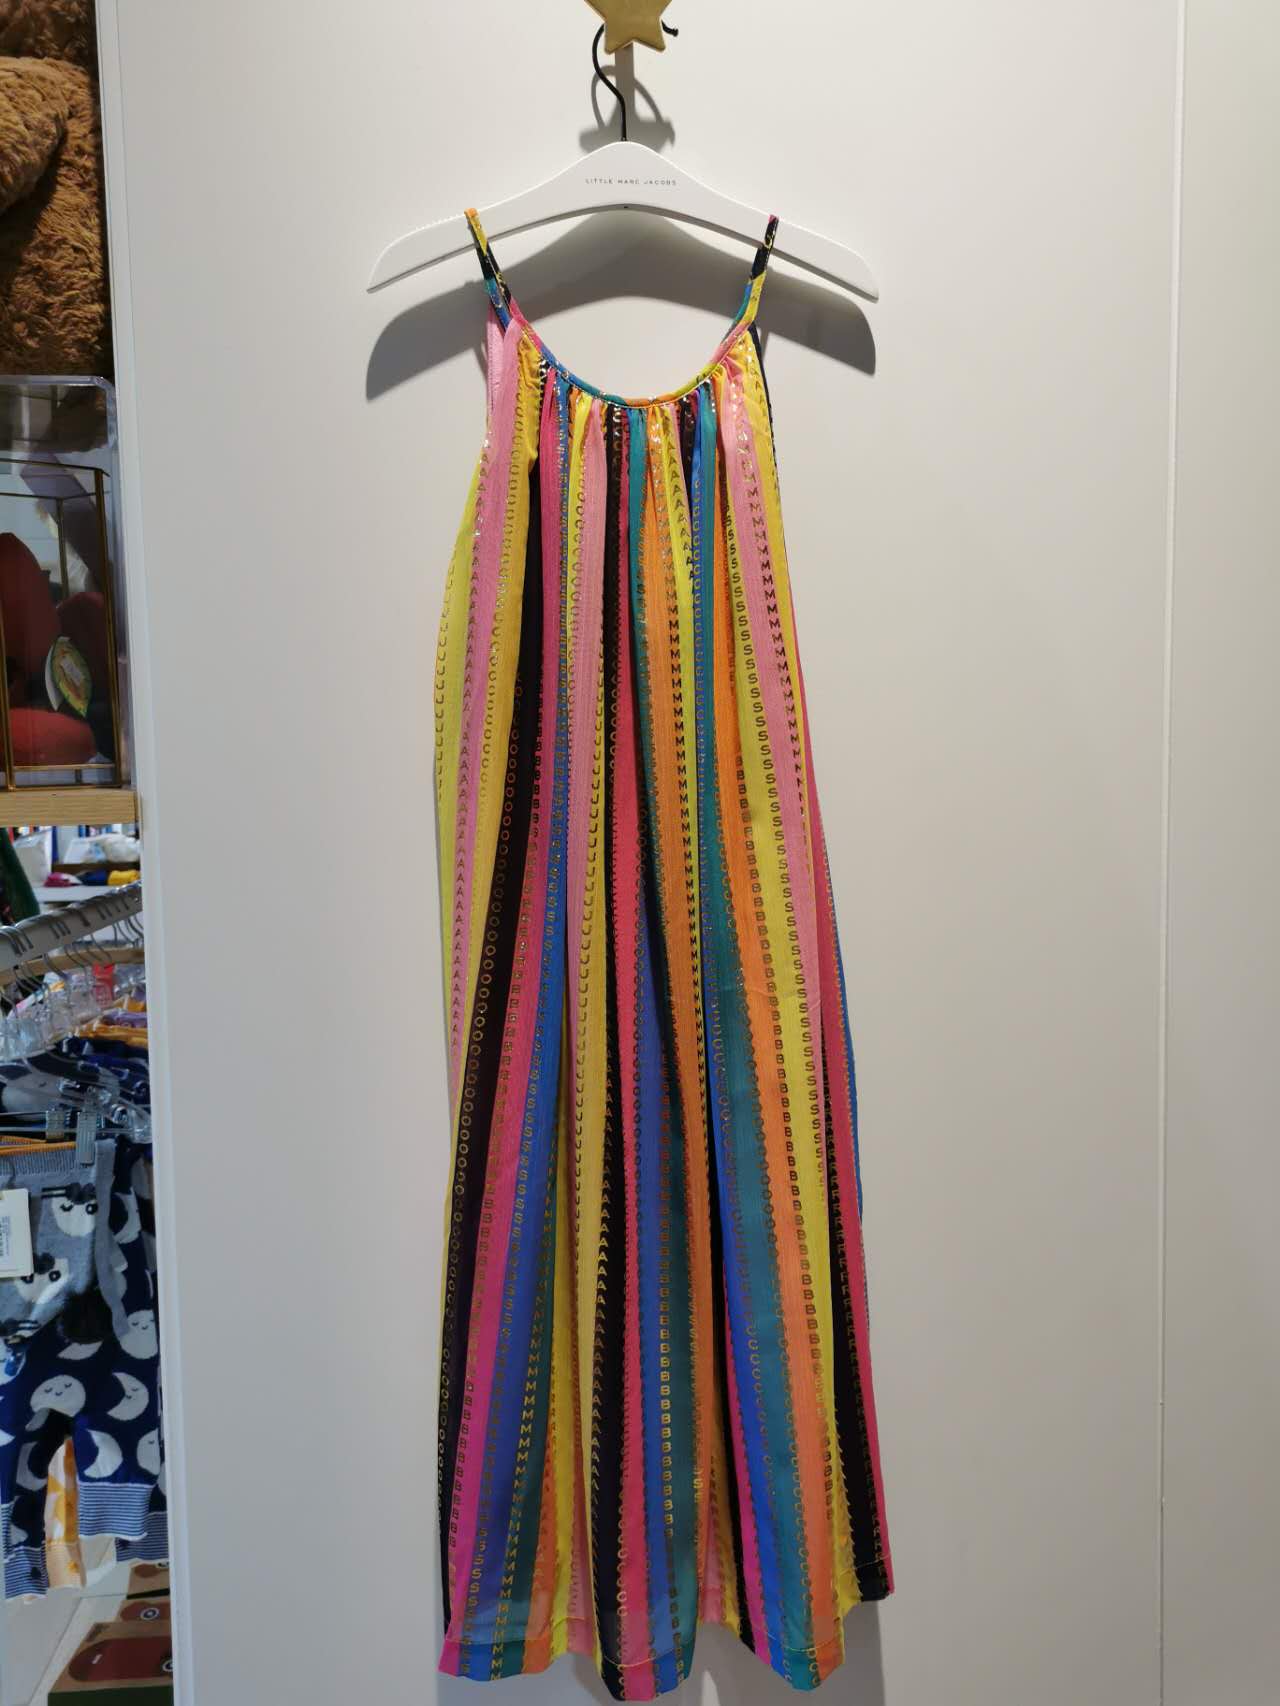 The Marc Jacobs Strappy Dress